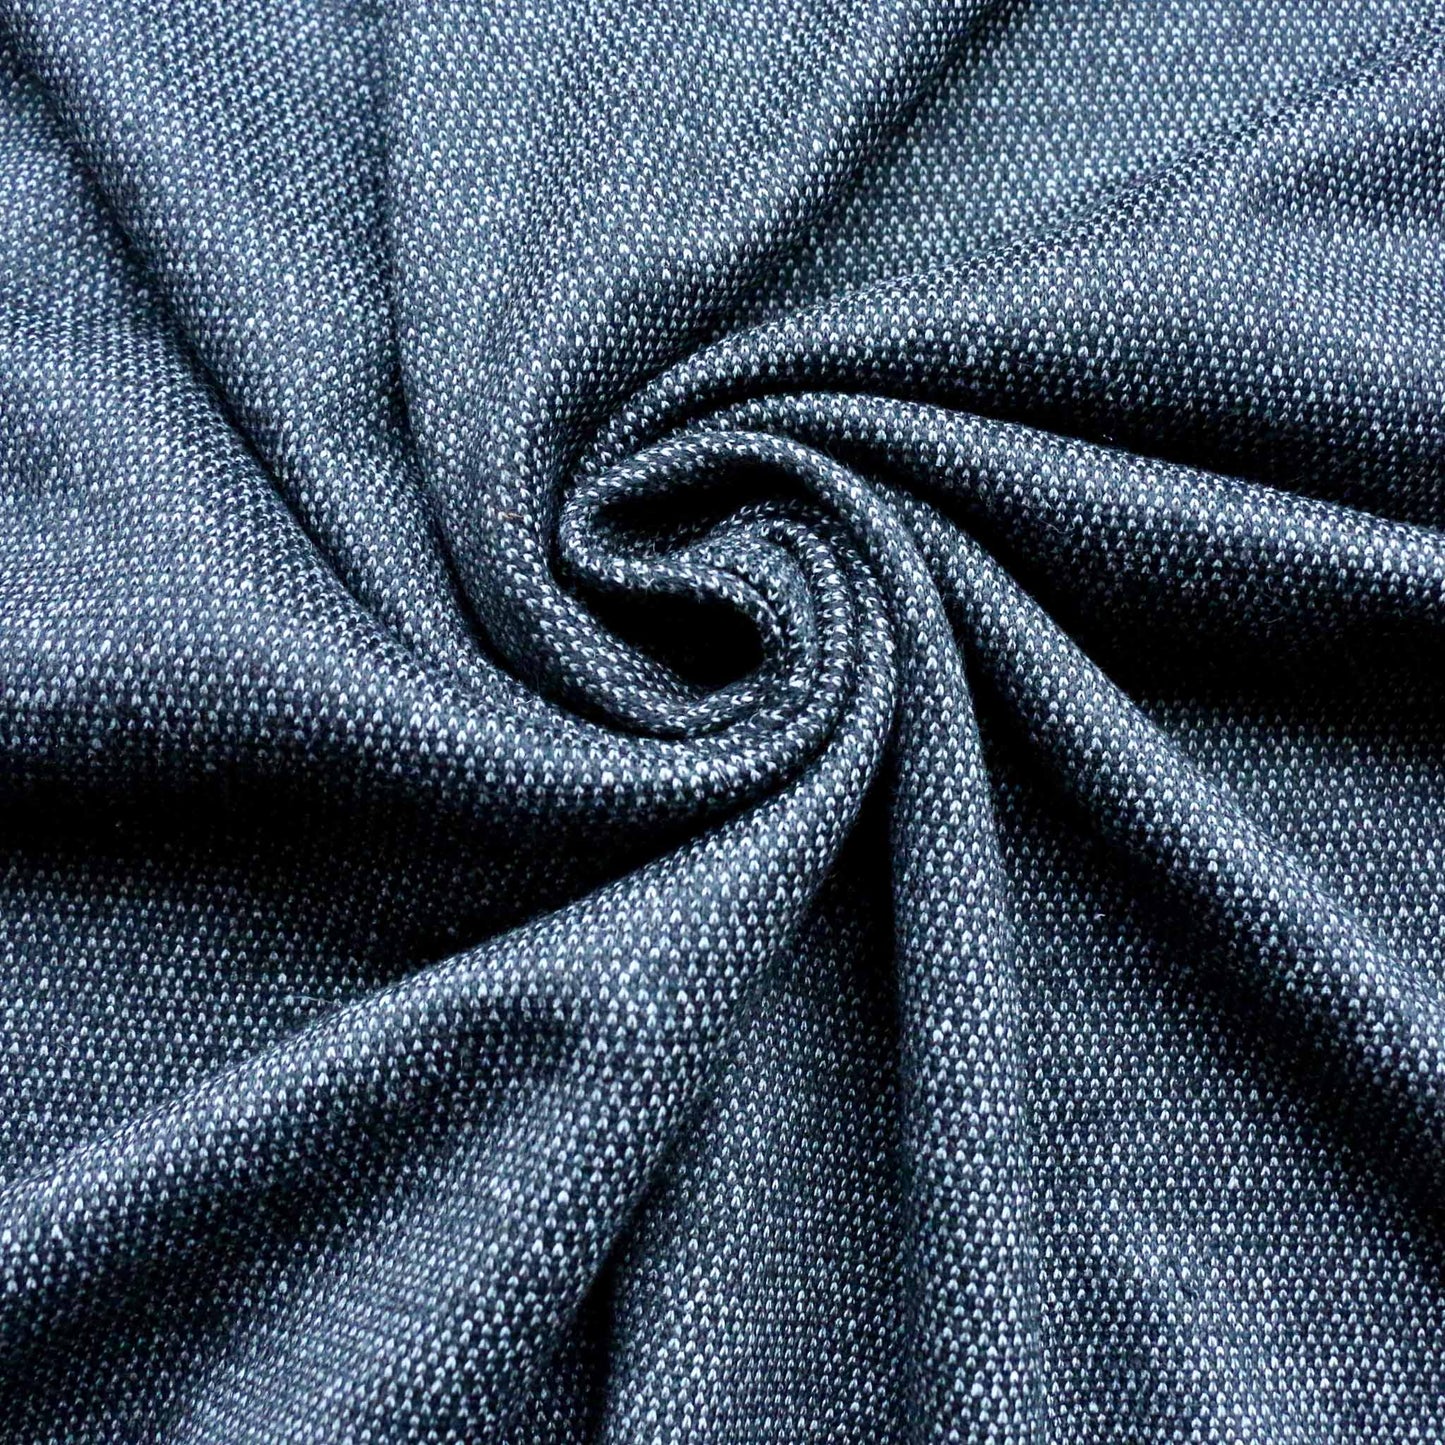 wool jersey knit dressmaking fabric with felt back in grey and black